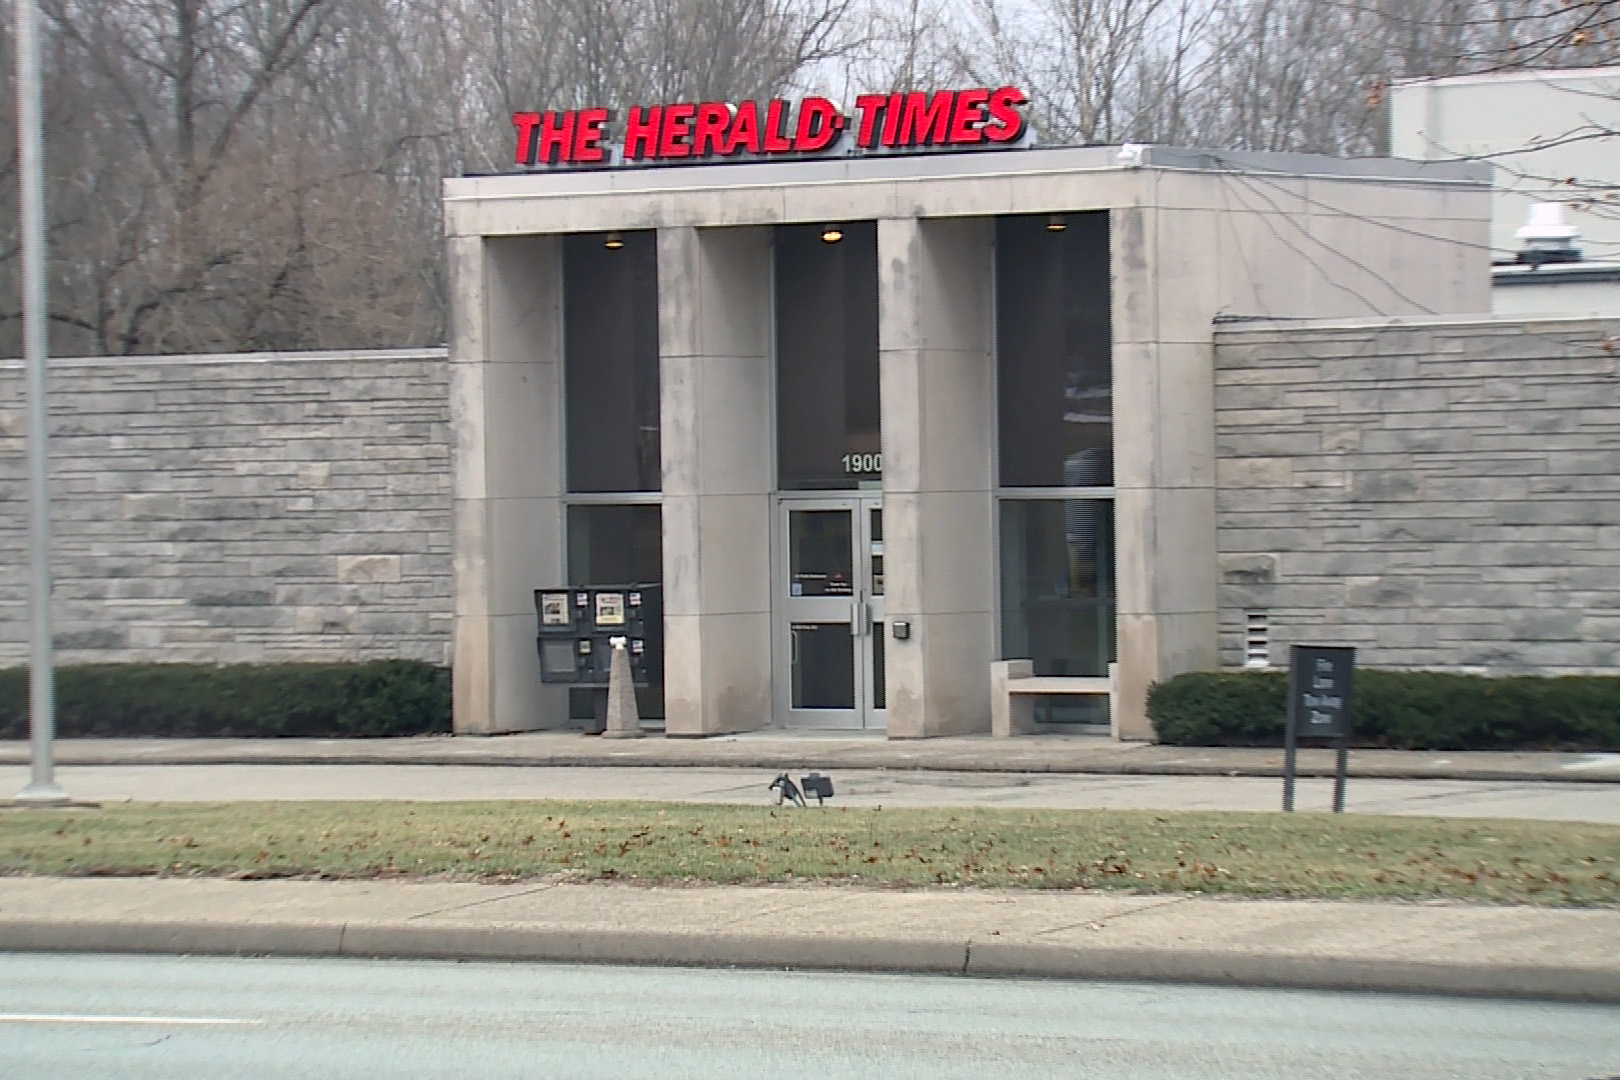 The Herald Times Building